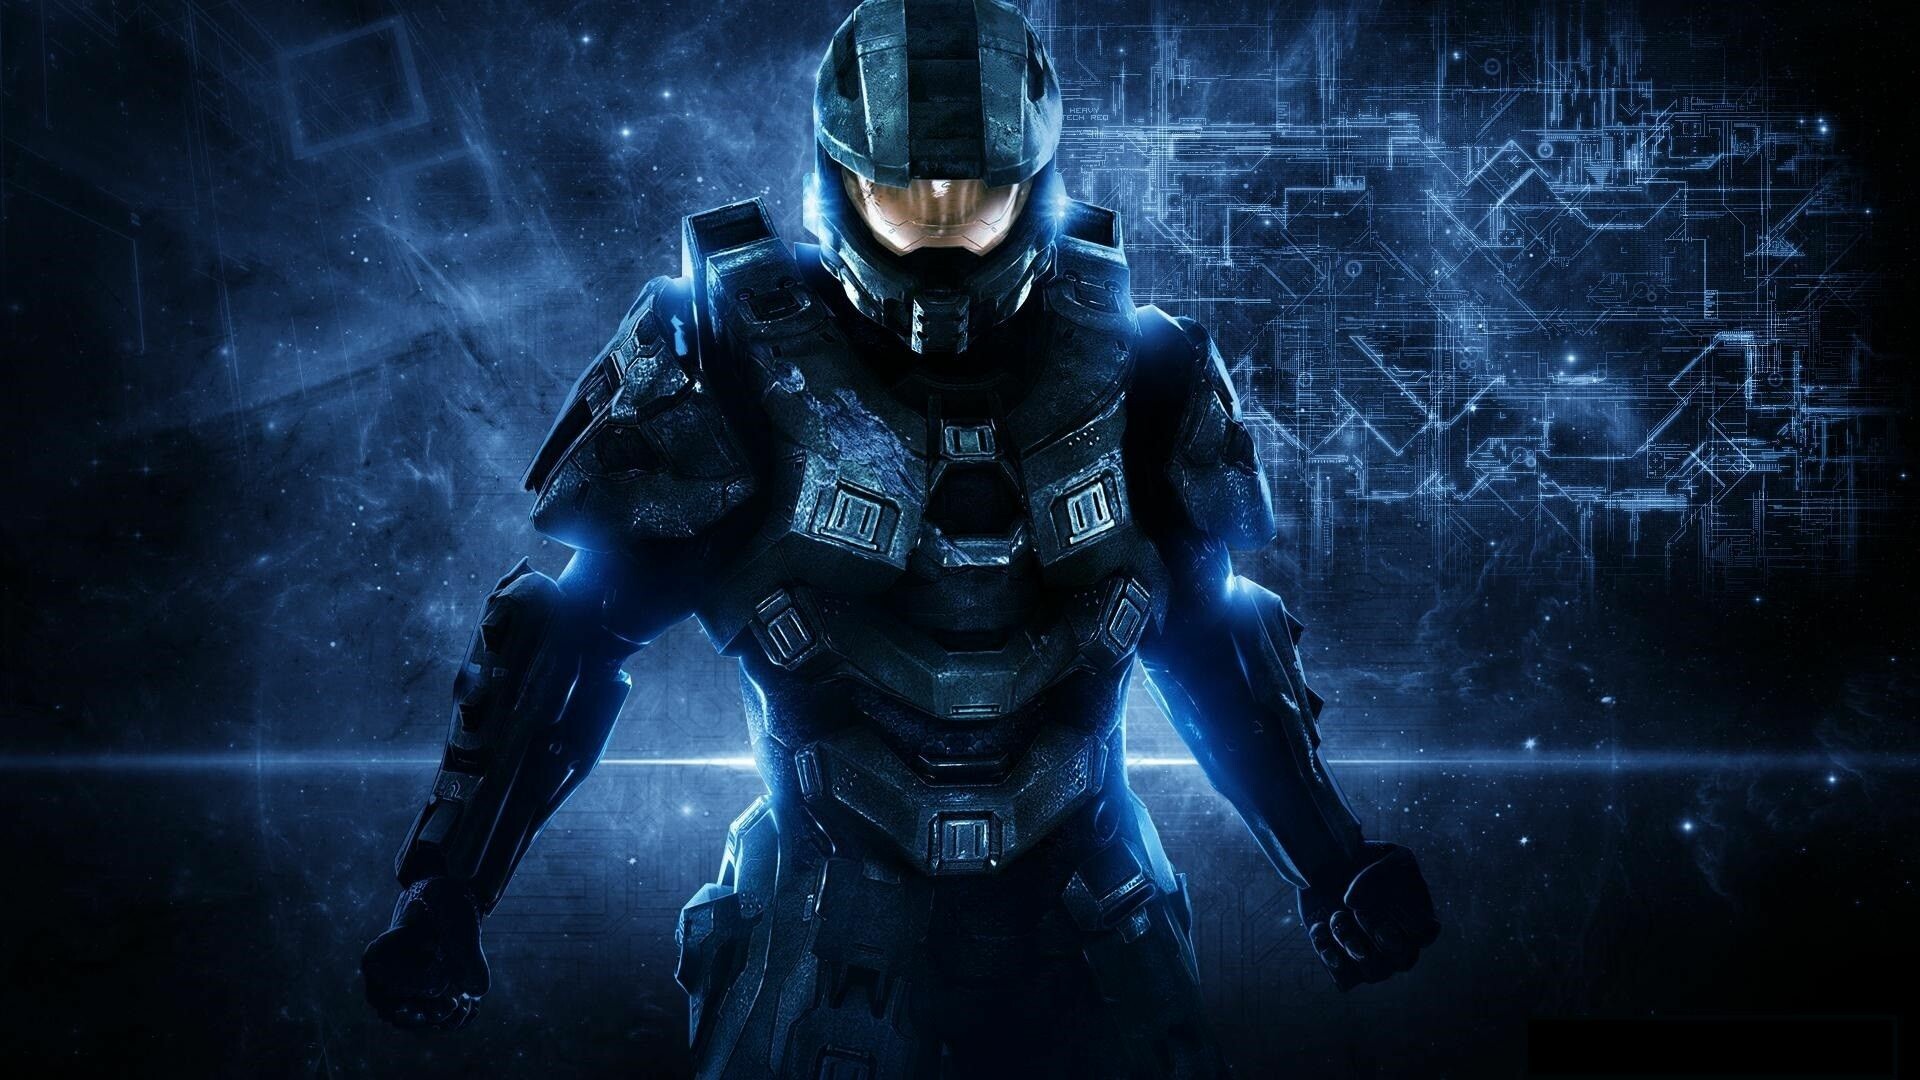 Halo series, High-definition wallpapers, Immersive gameplay, Halo fan favorites, 1920x1080 Full HD Desktop